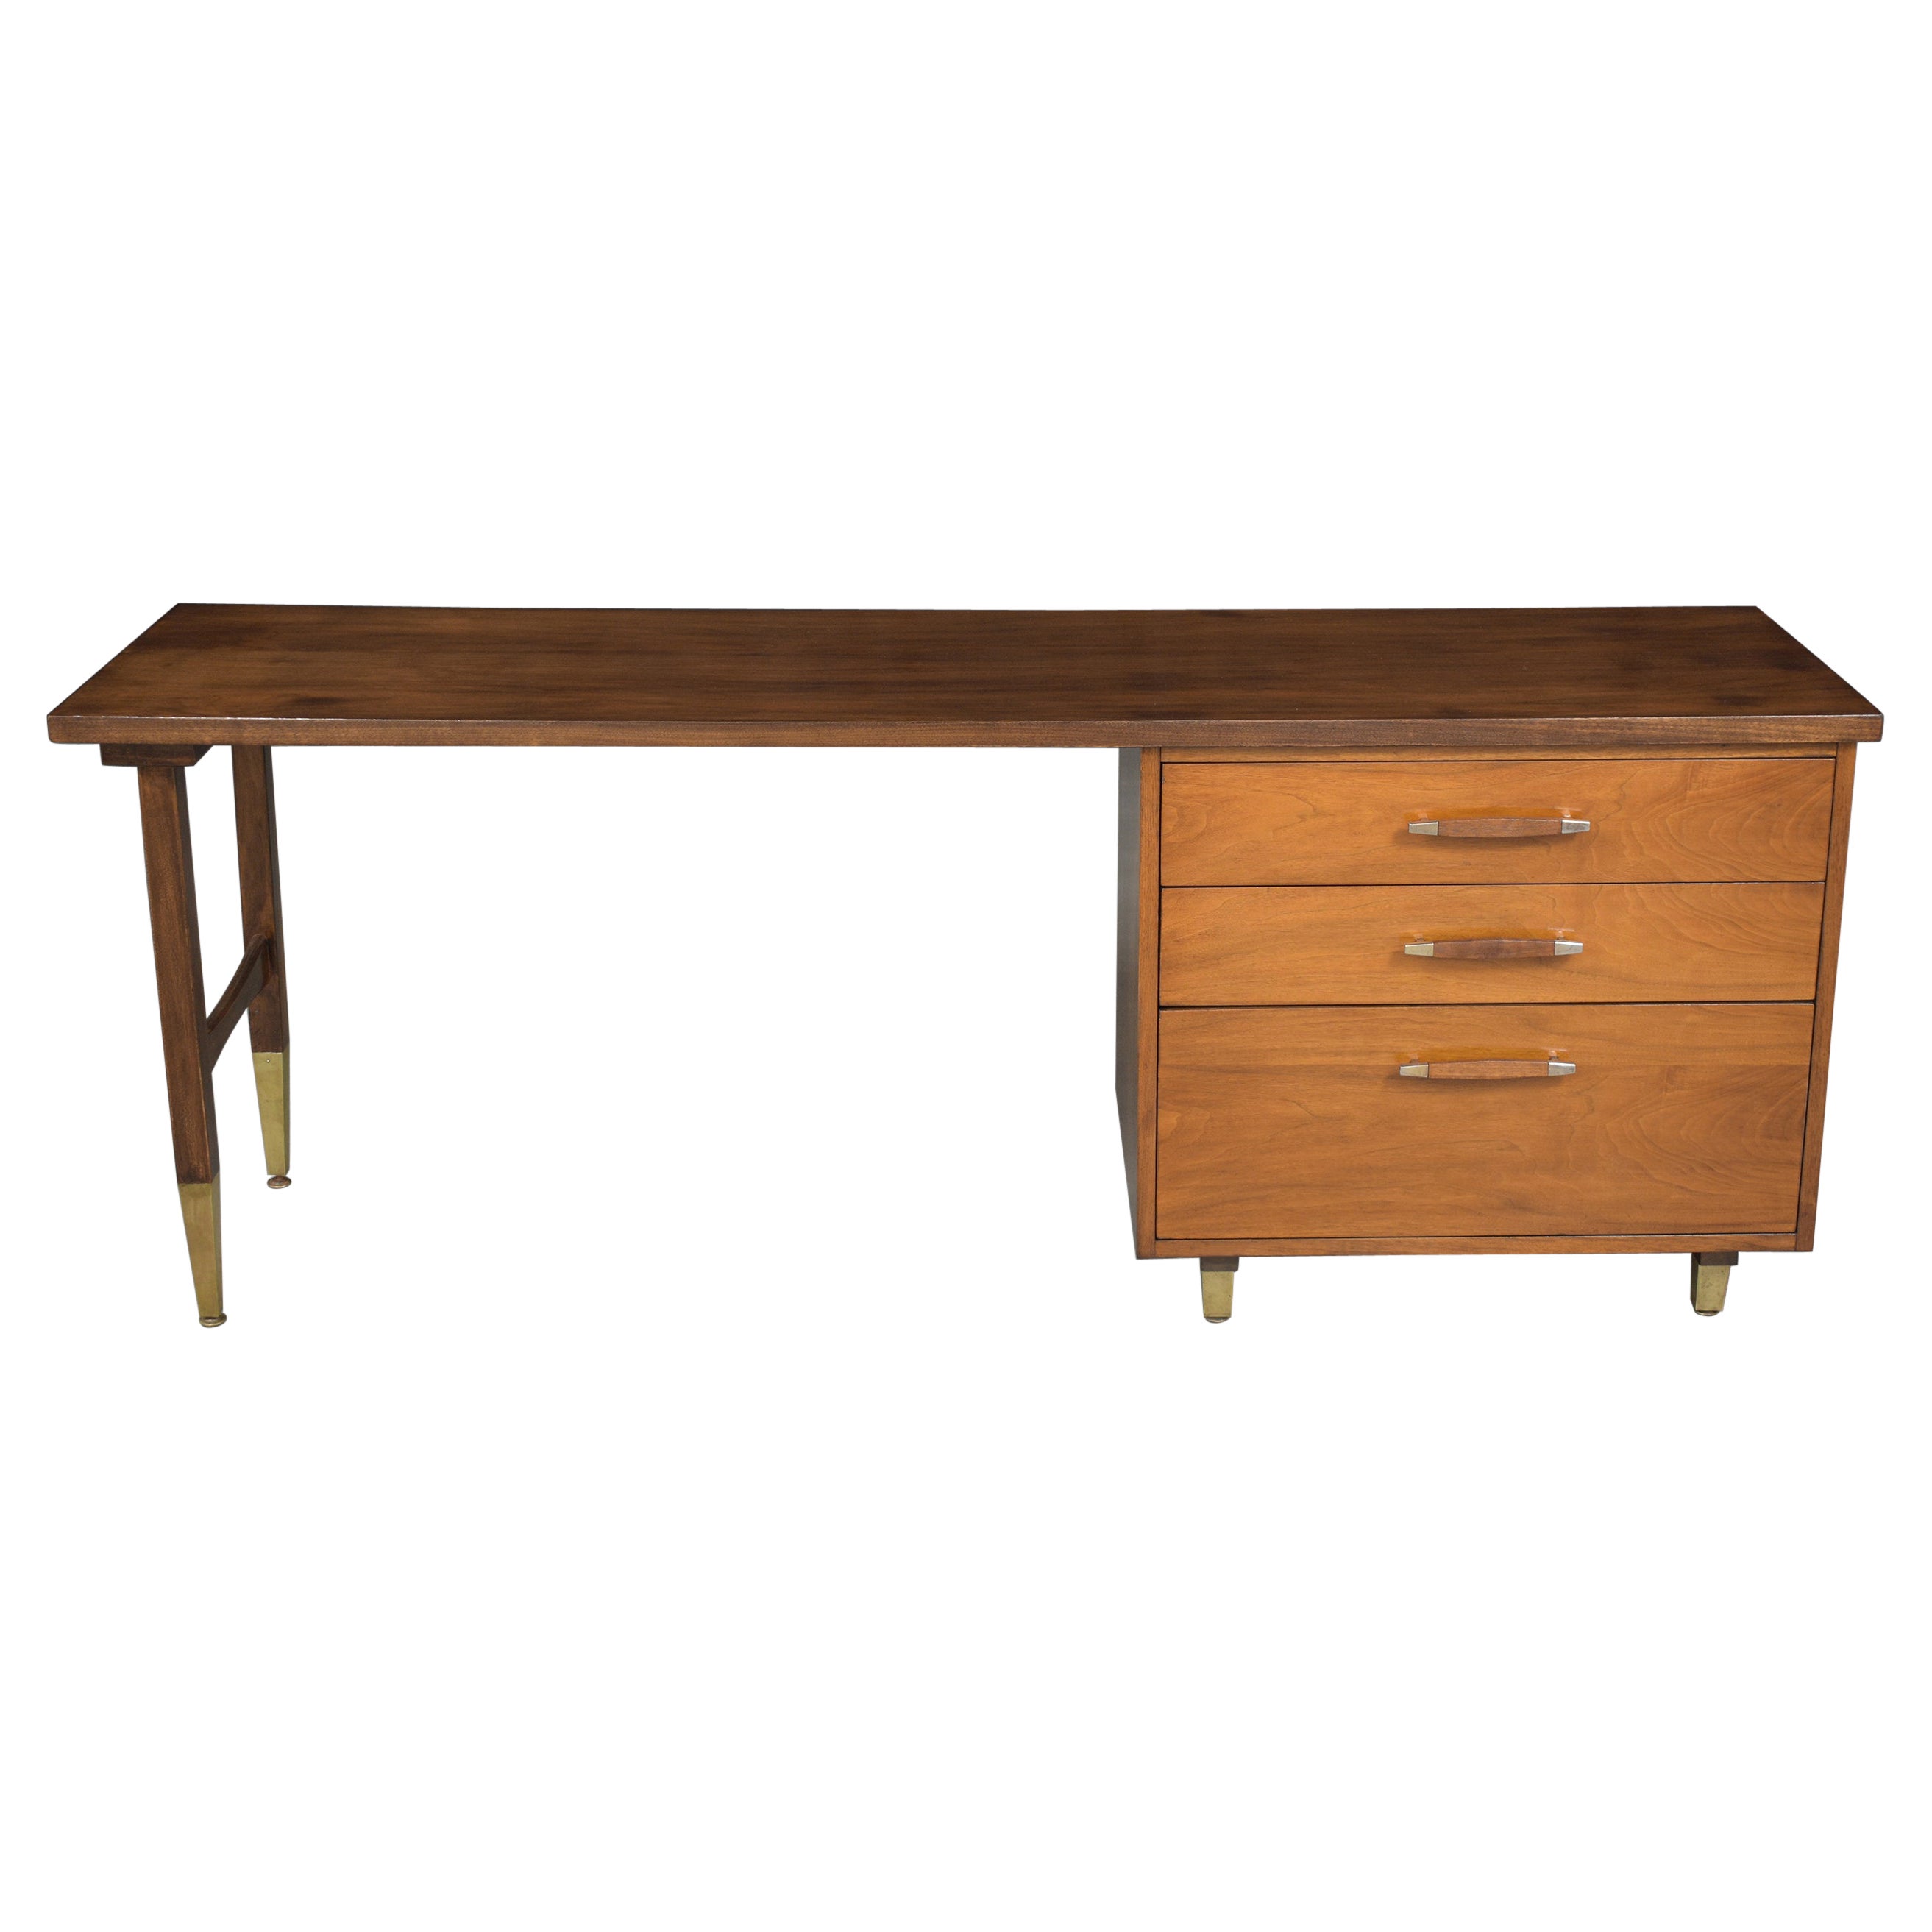 1960s Mid-Century Modern Walnut Executive Desk with Chrome Accents